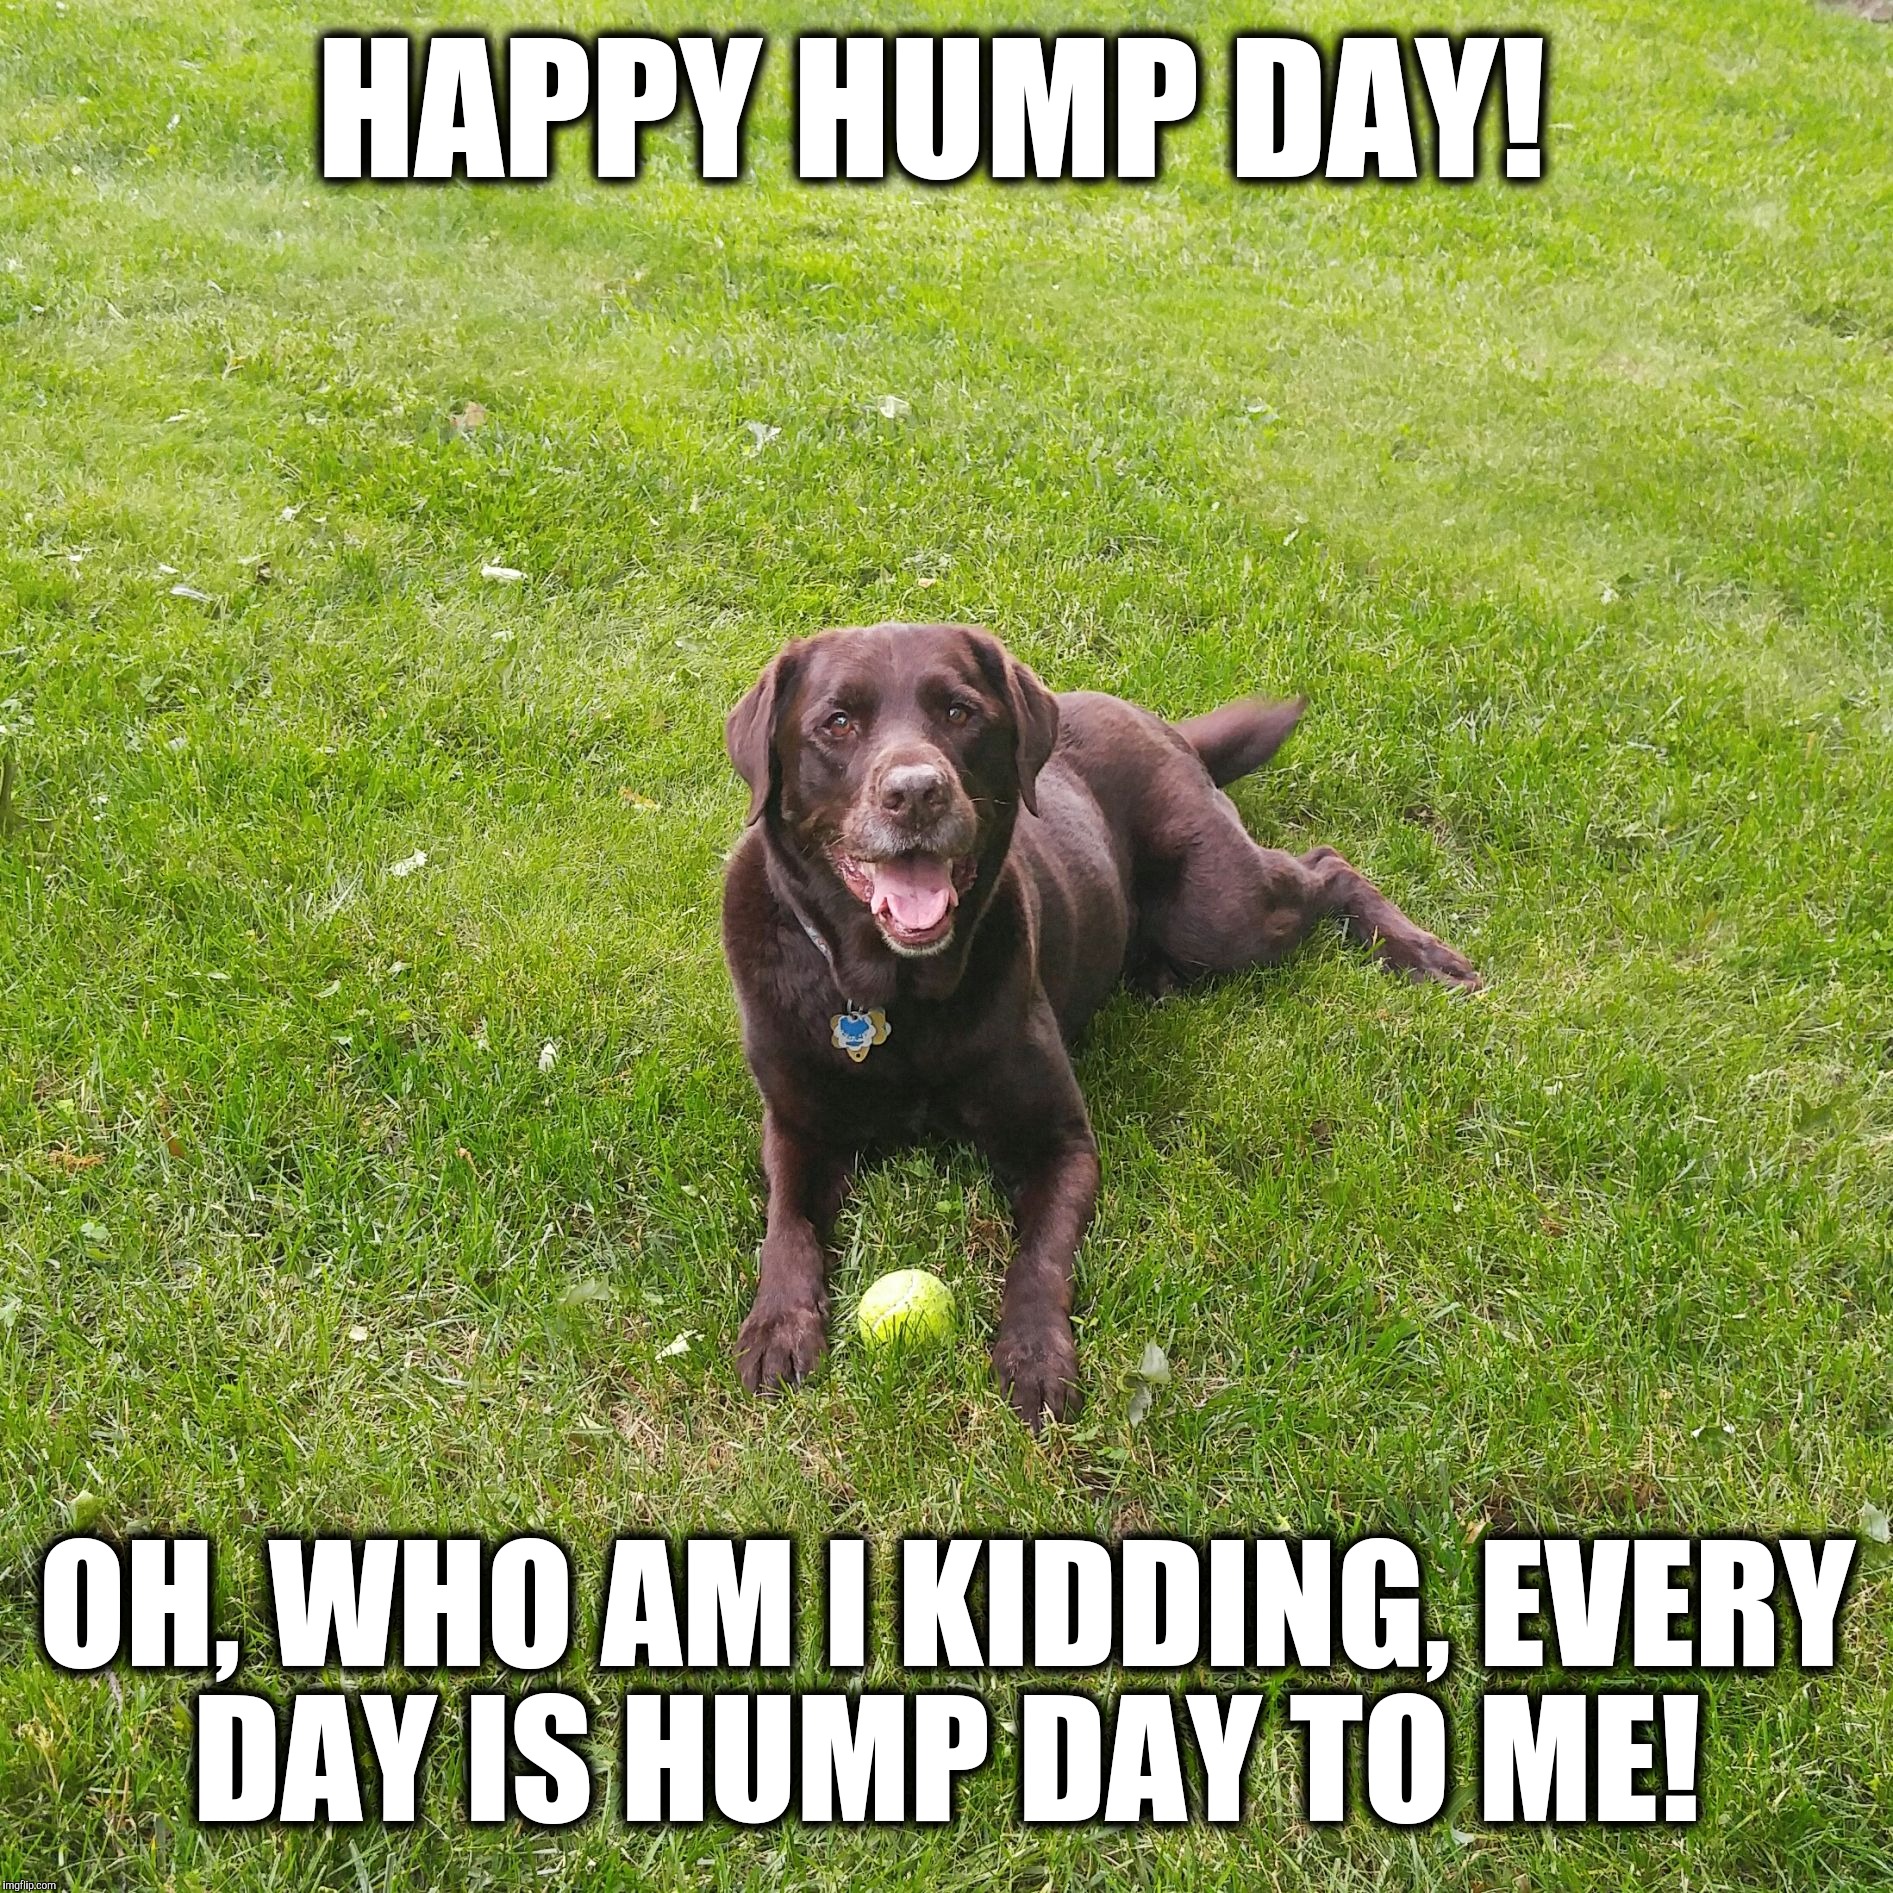 happy hump day funny meme - Happy Hump Day! Oh, Who Am I Kidding. Every Day Is Hump Day To Me!